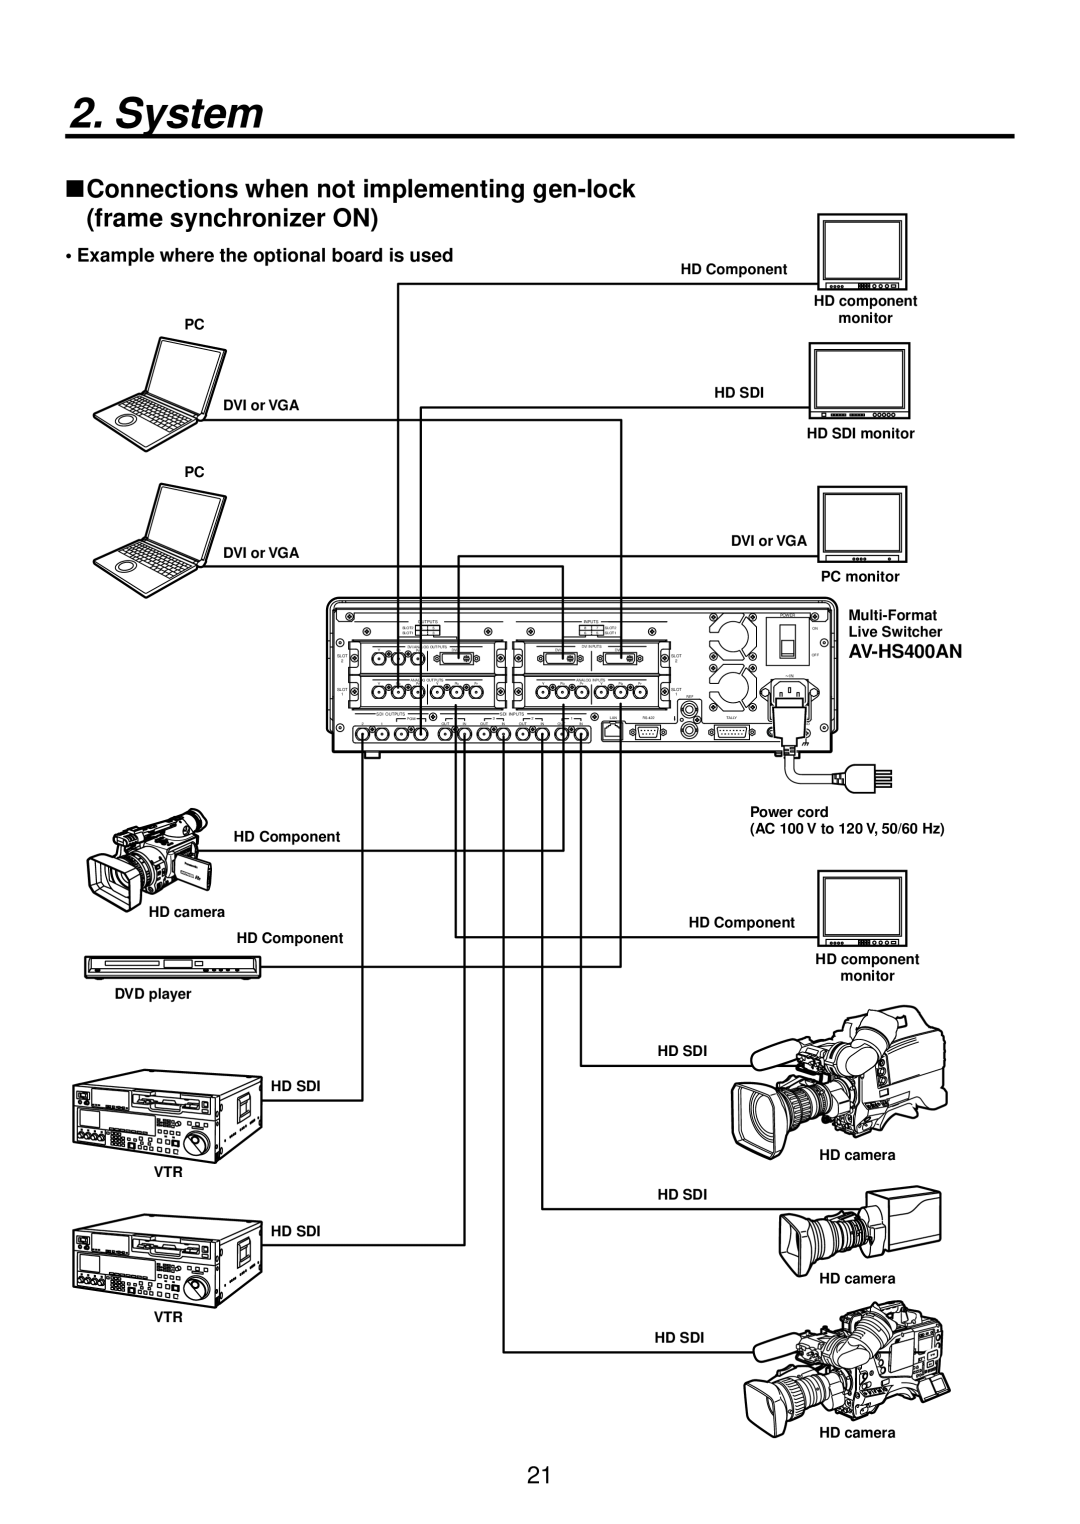 Panasonic AV-HS400AN Connections when not implementing gen-lock frame synchronizer ON, System, HD Component, HD component 